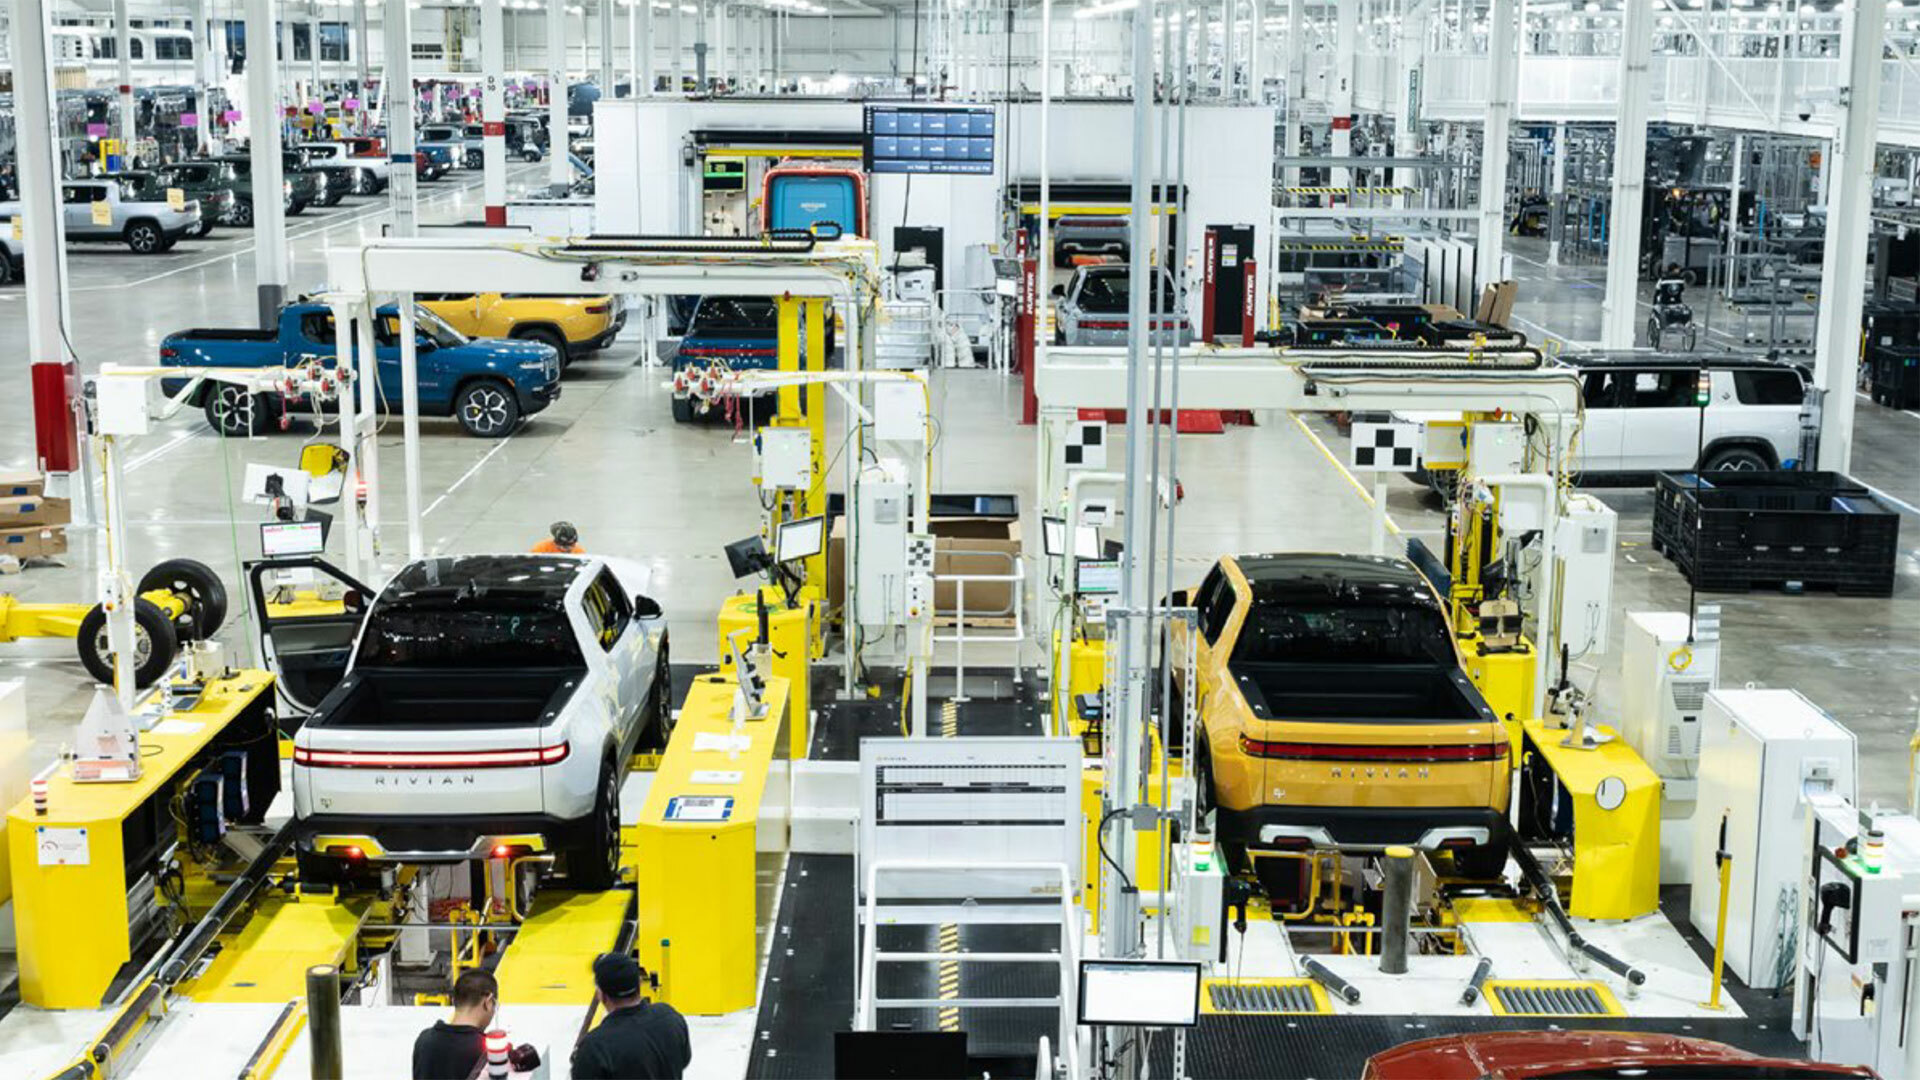 Rivian Says It Expects To Build 50,000 Vehicles This Year